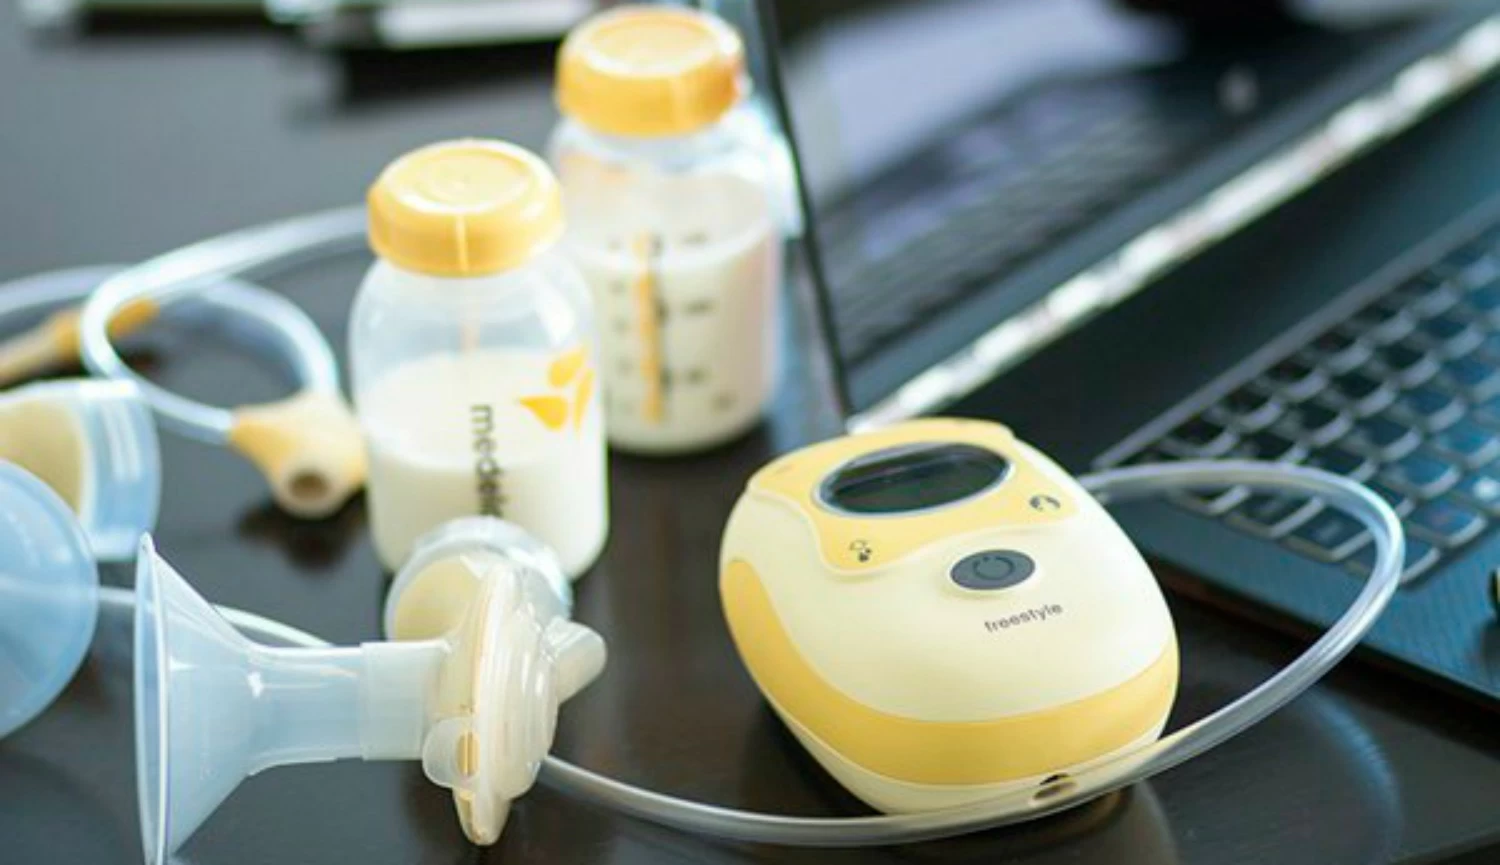 How Do I Know What Medela Breast Pump is Right for Me?